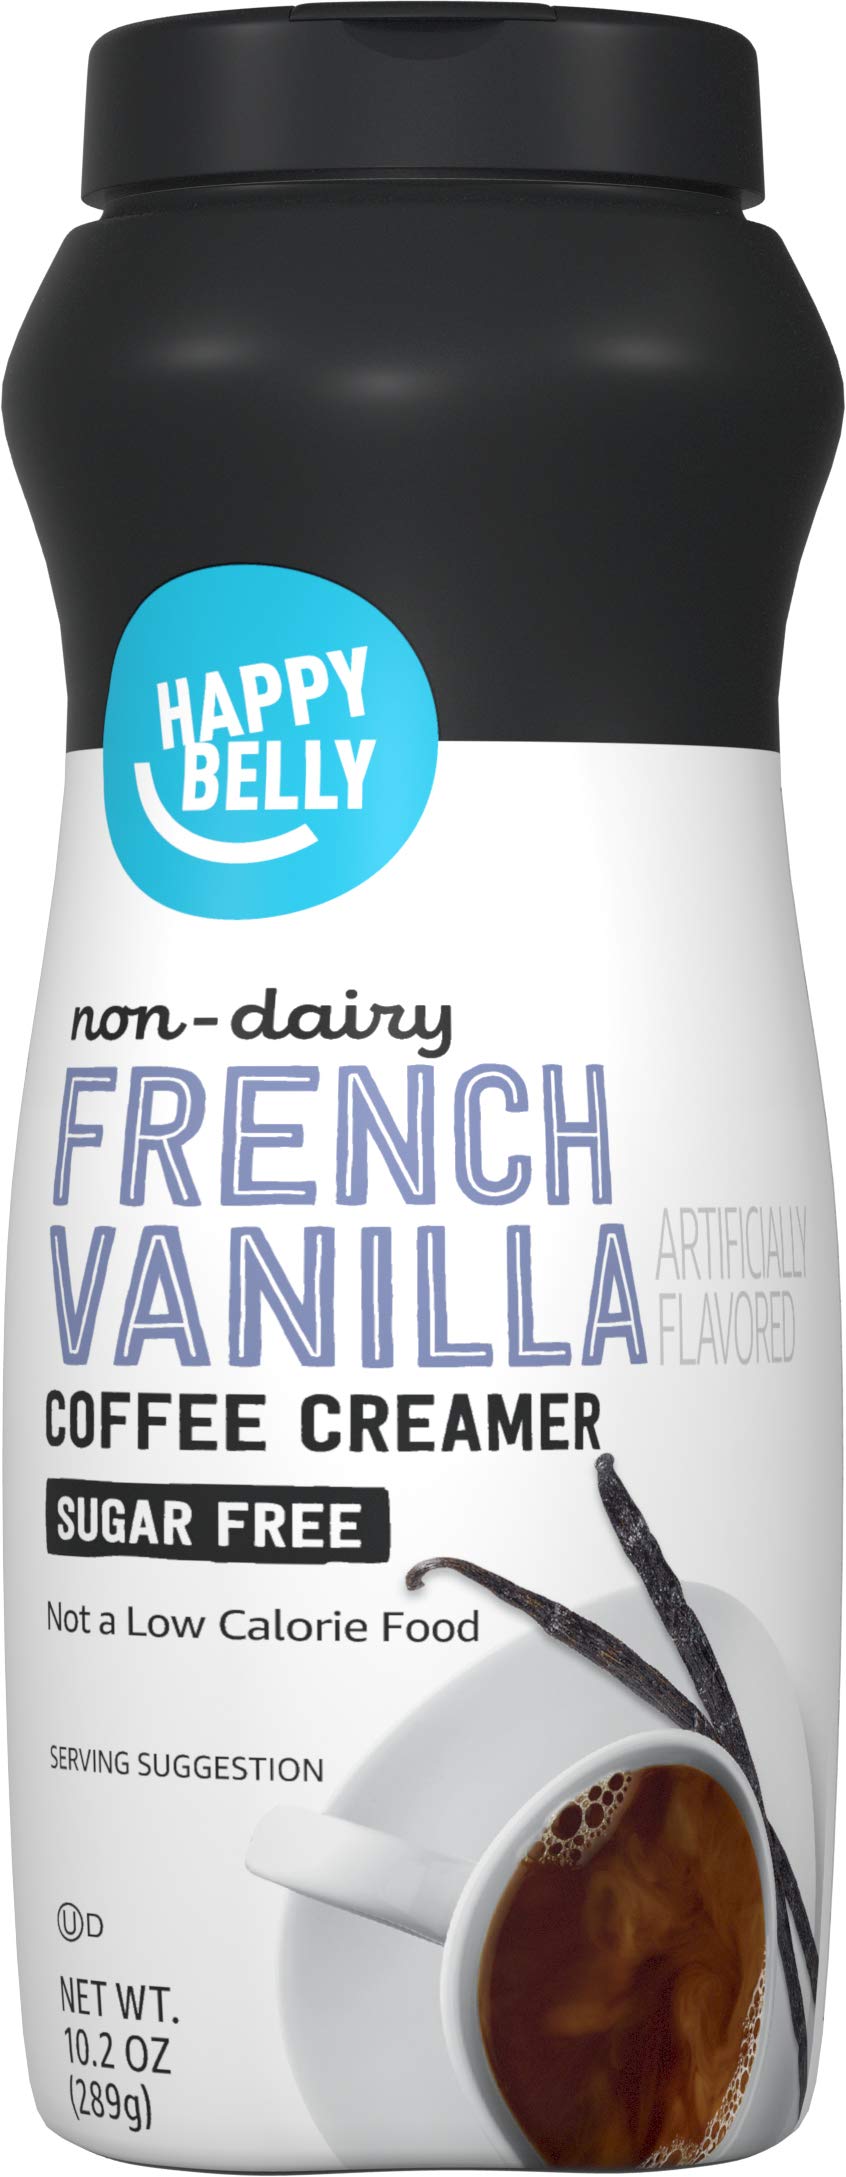 Amazon Brand - Happy Belly Powdered Non-dairy French Vanilla Coffee Creamer (Sugar-Free), 10.2 Ounce Free Shipping w/ Prime or on orders $25+ | $1.88